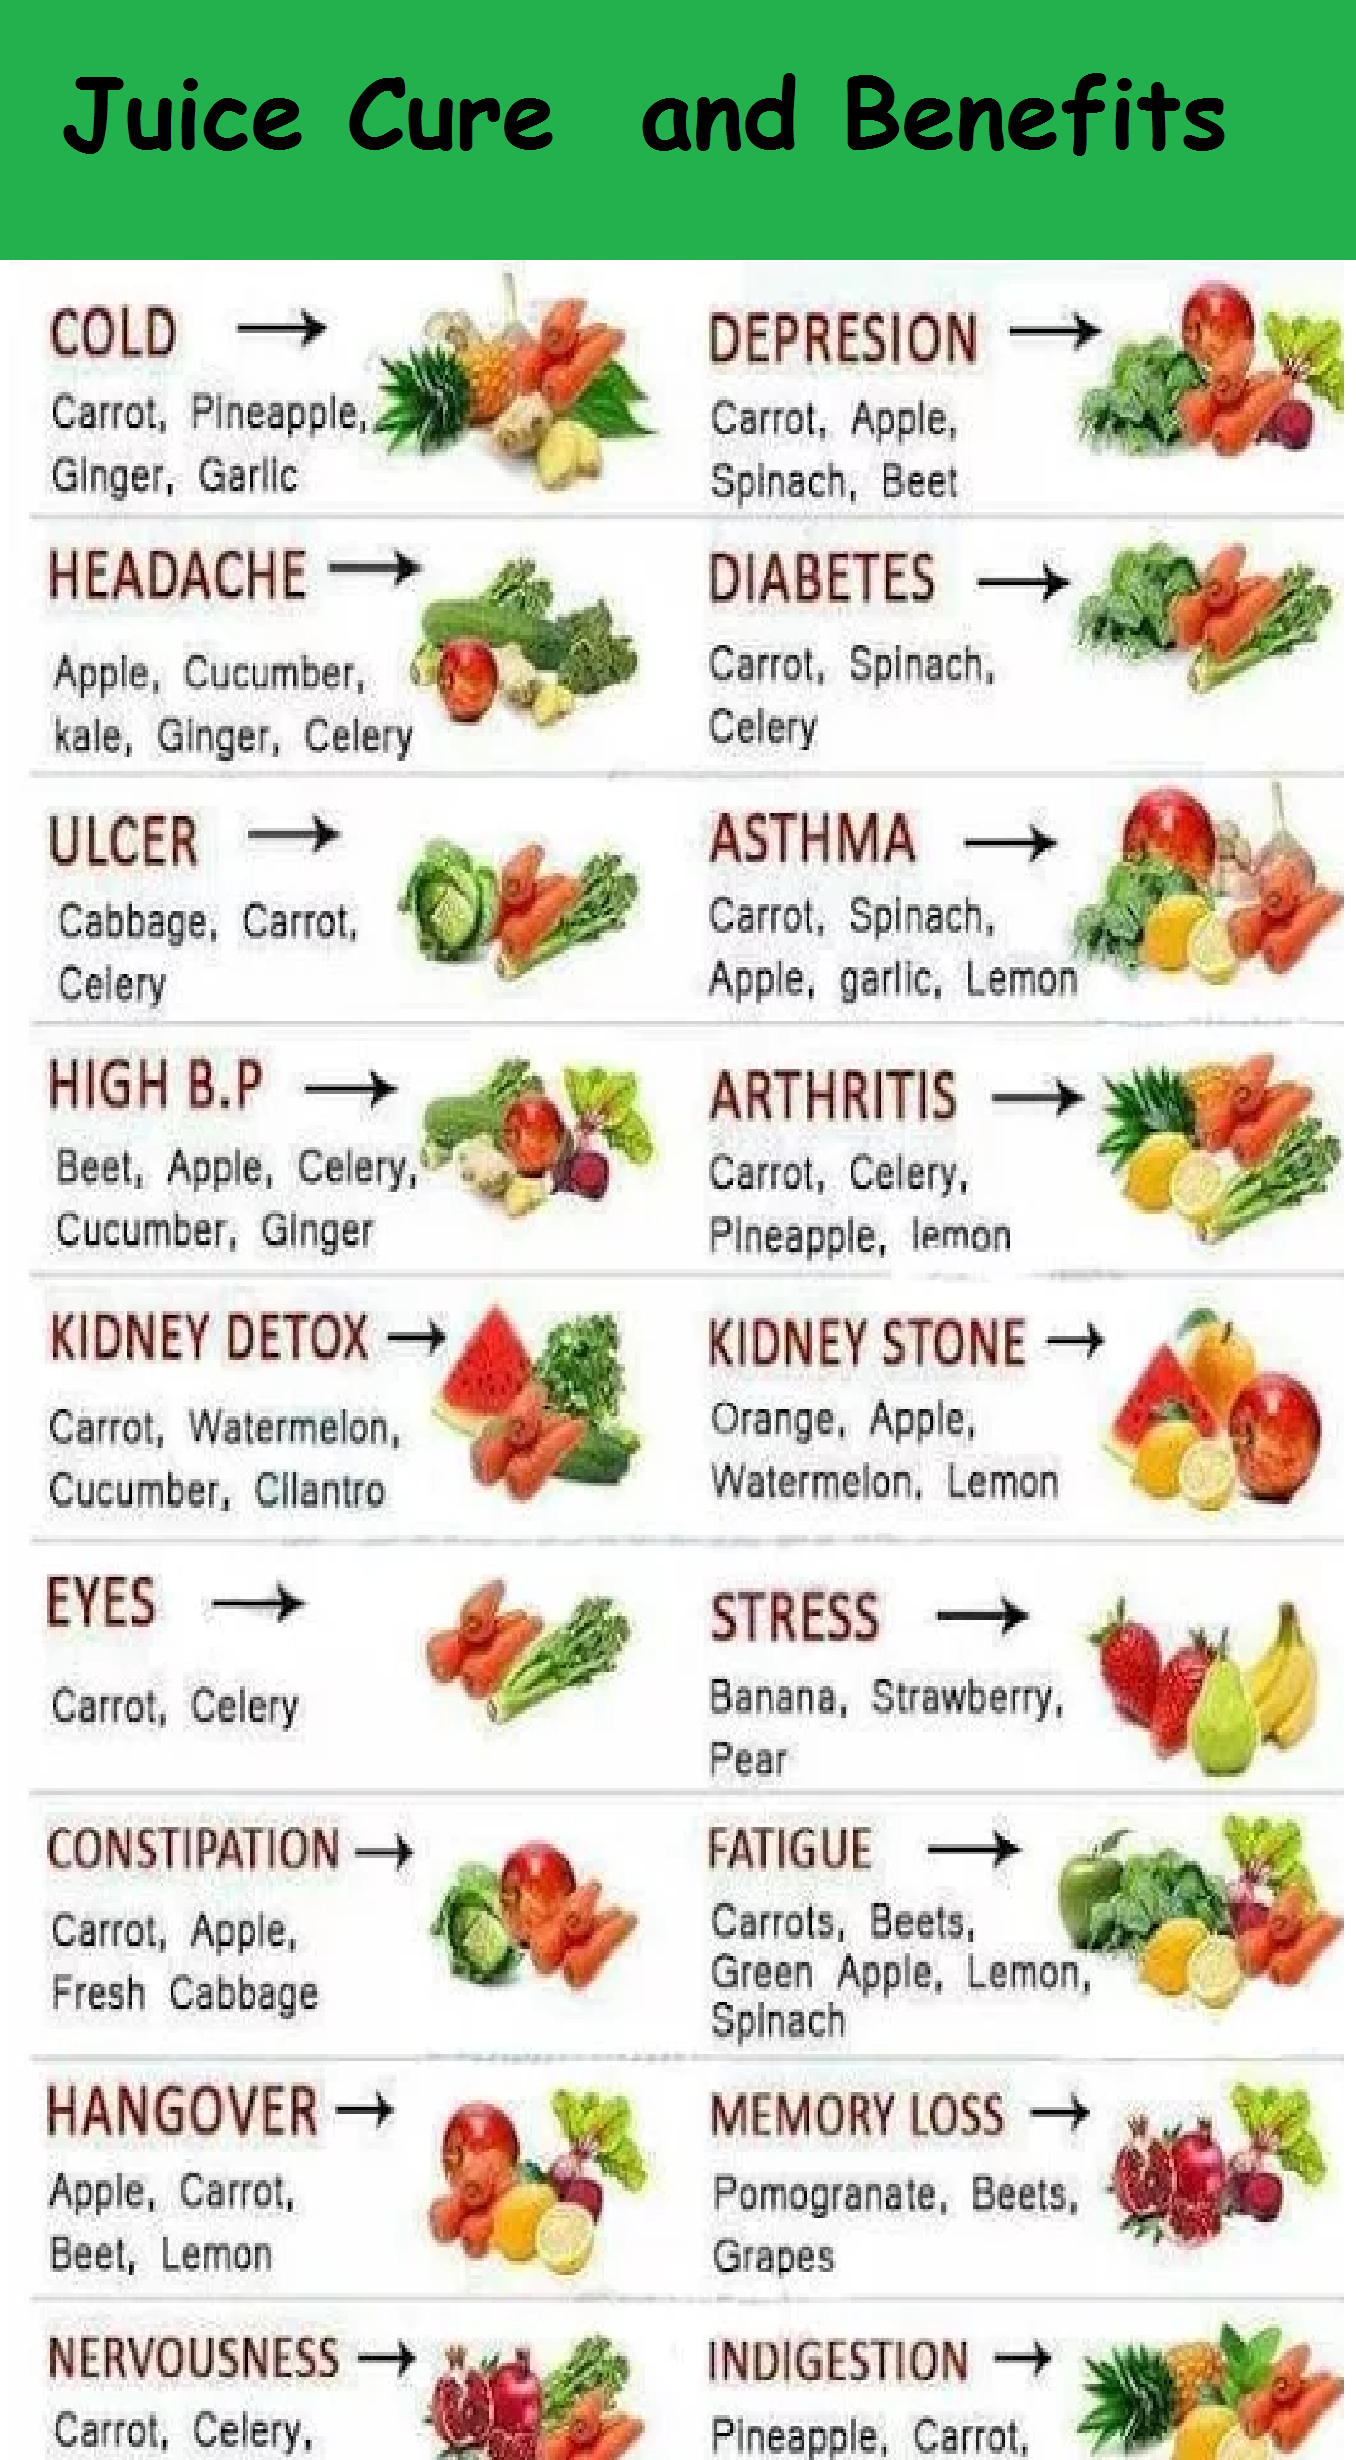 Juice Cure and its Benefits